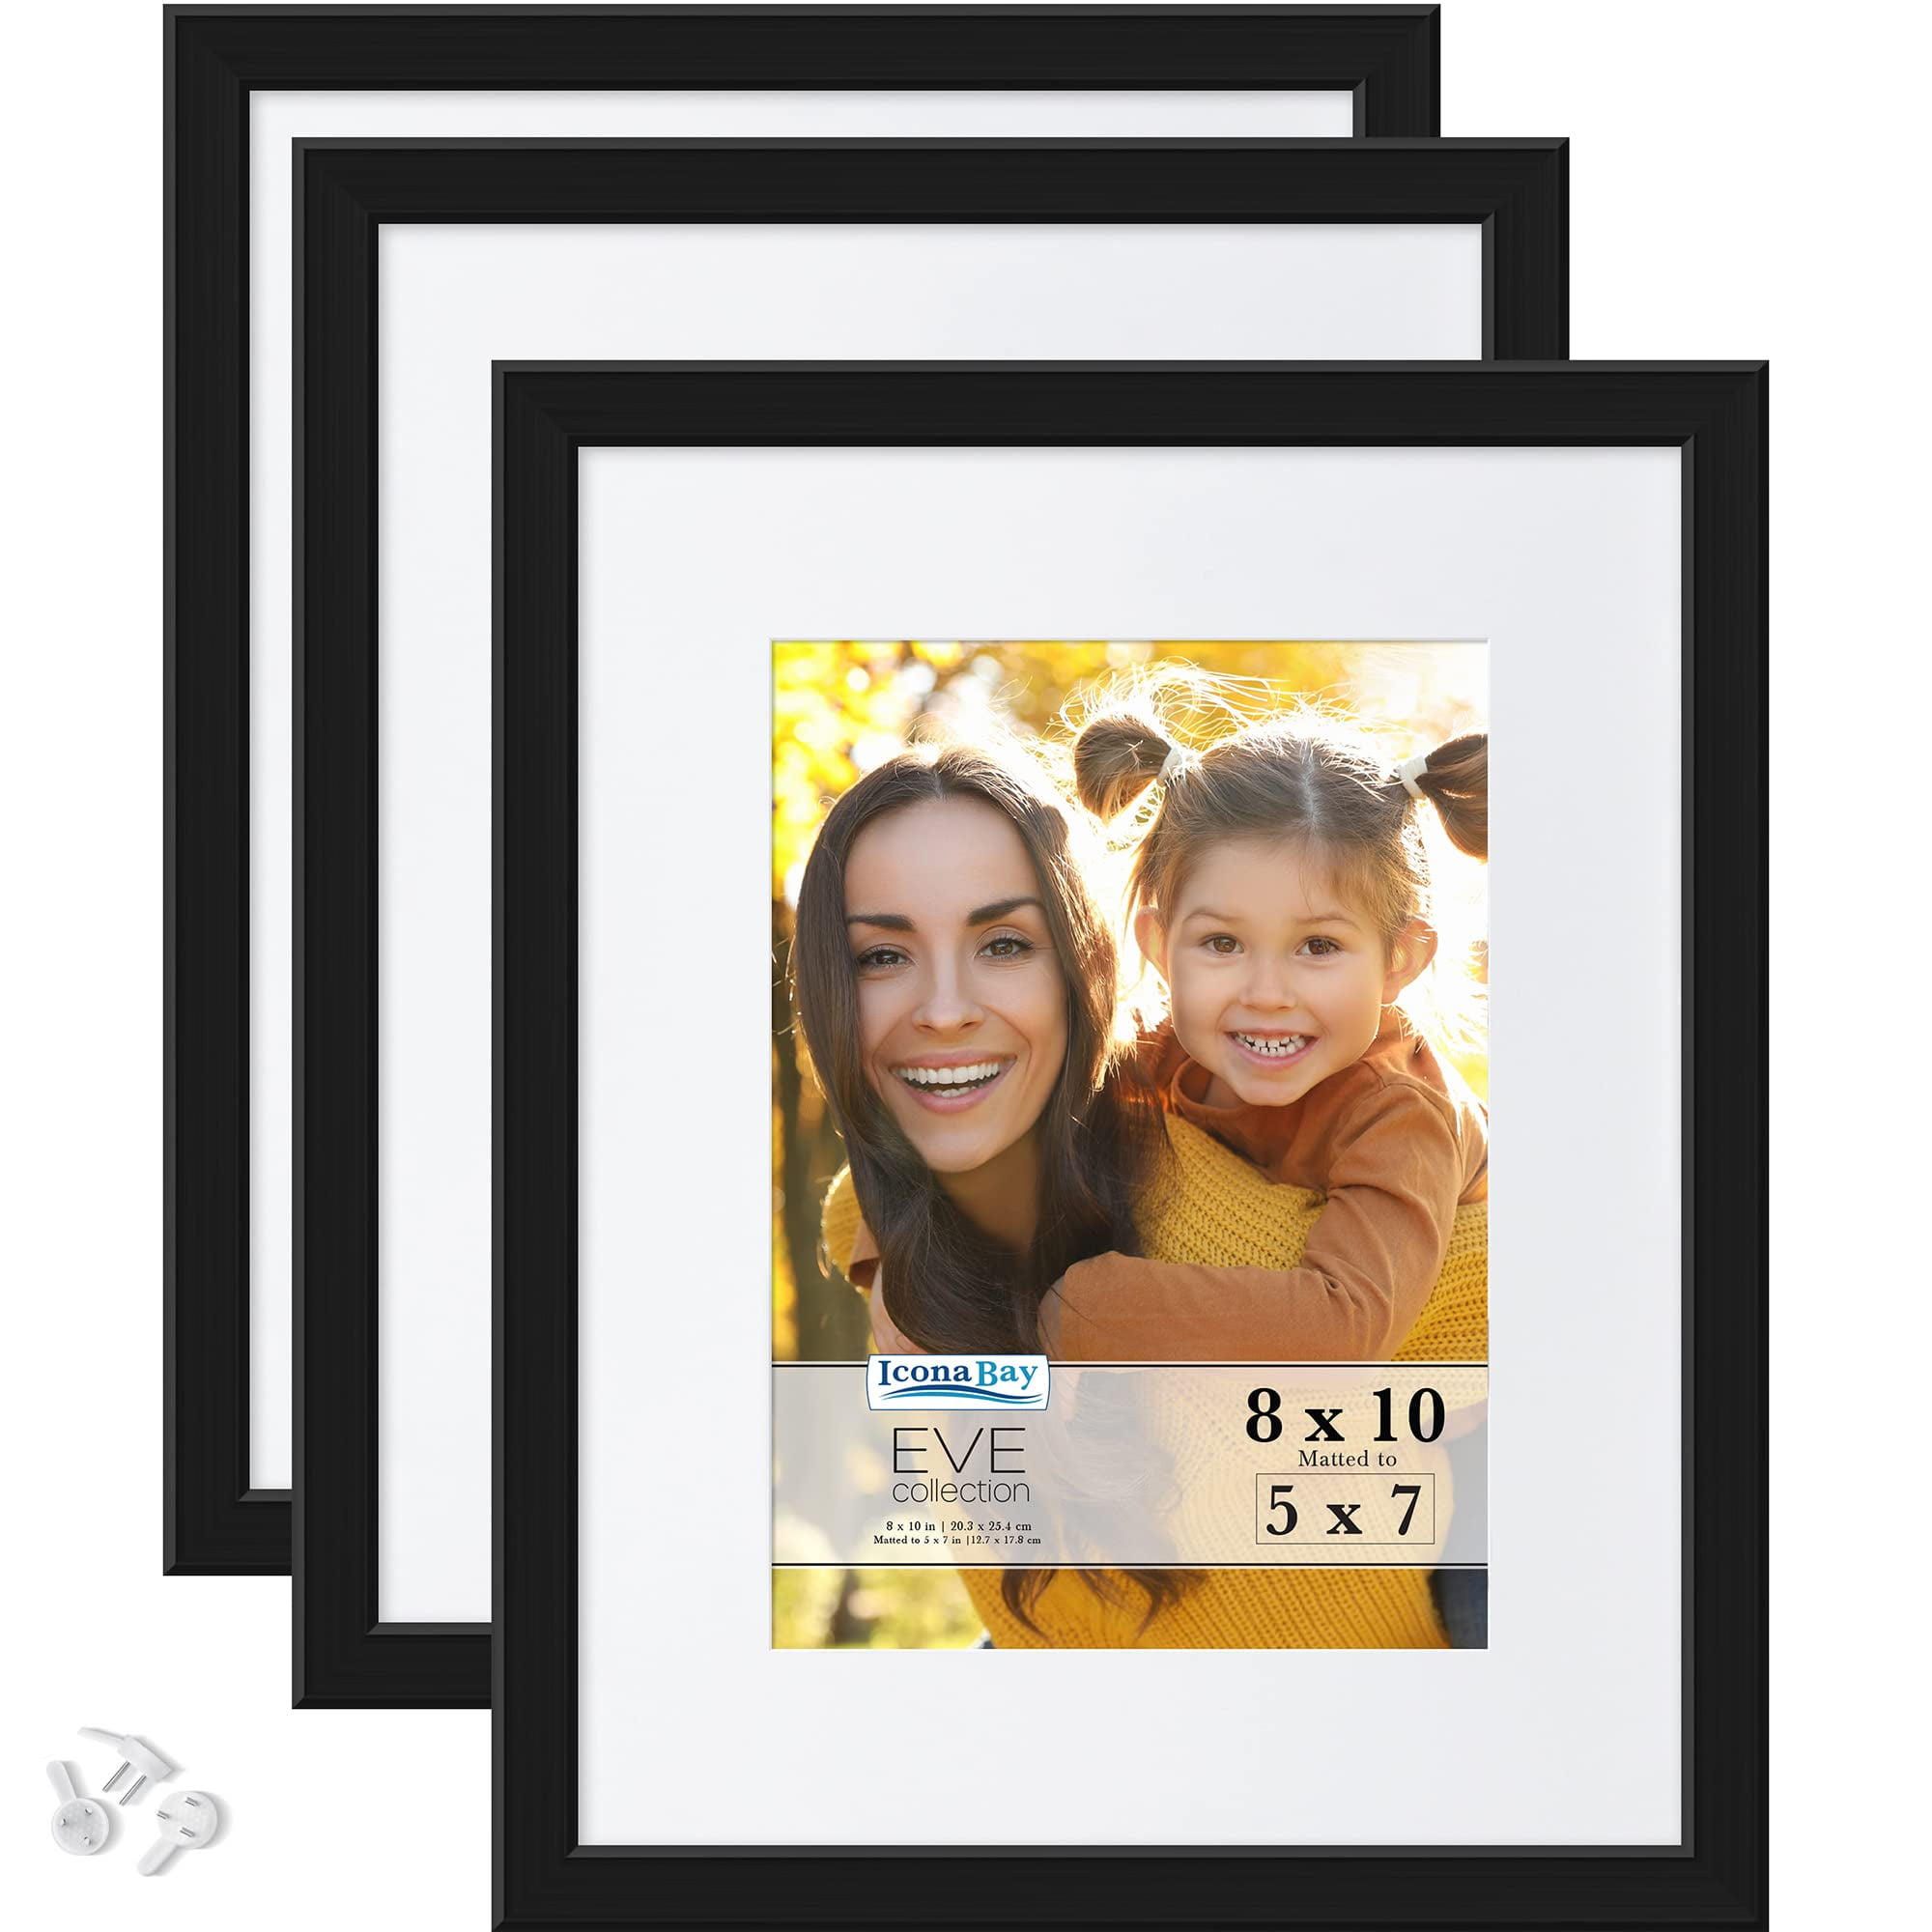 Quadro Frames 11x22 inch Picture Frame KIT Style P375-3/8 inch Wide Molding 